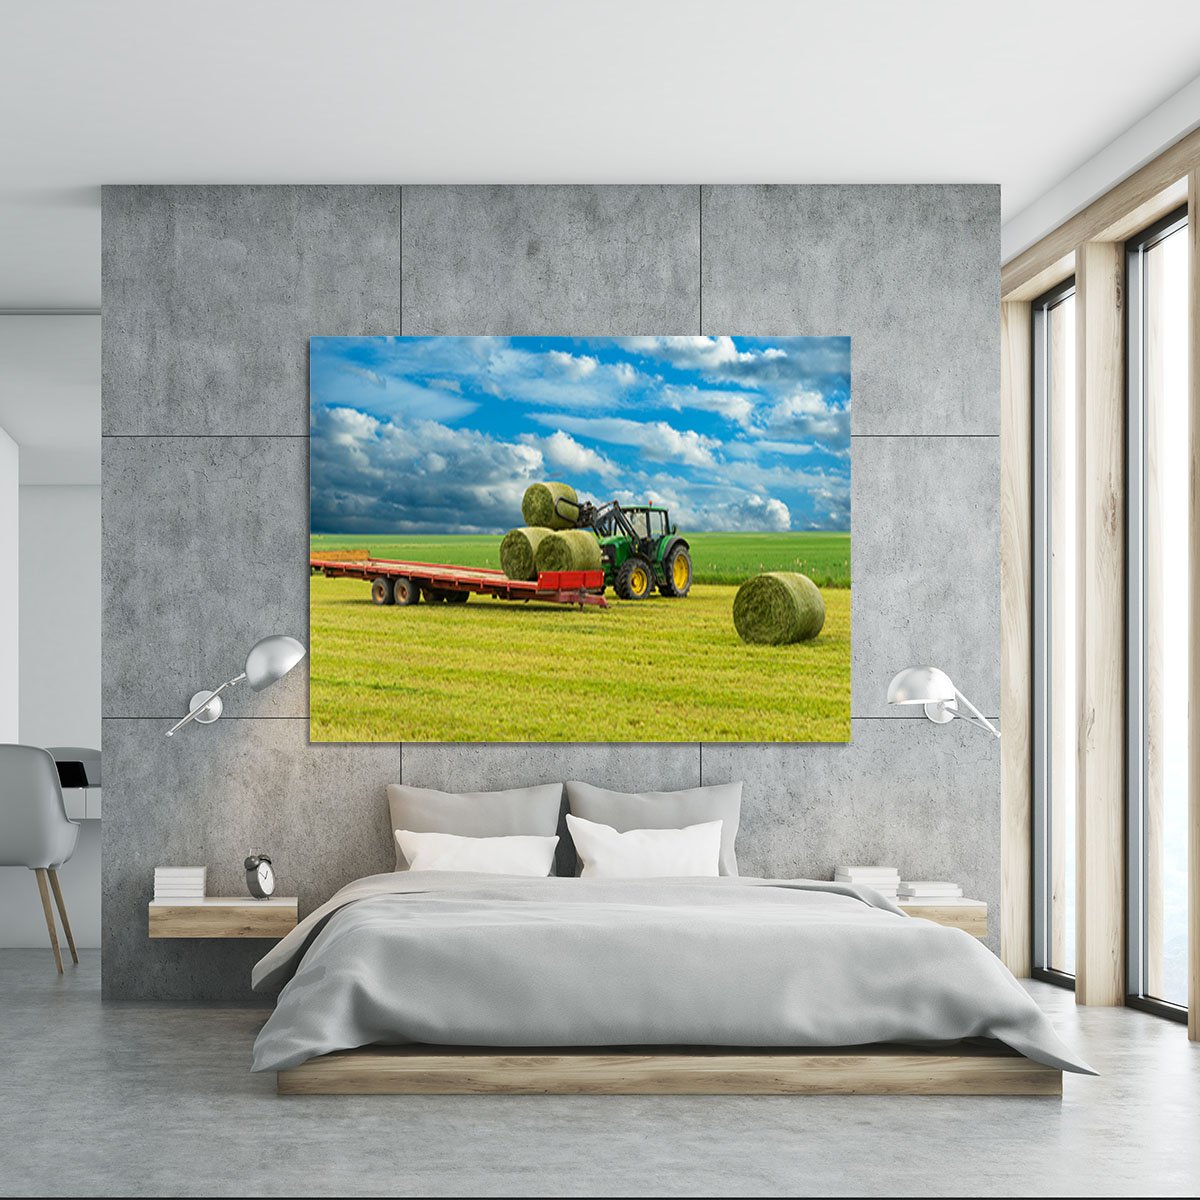 Tractor and trailer with hay bales Canvas Print or Poster